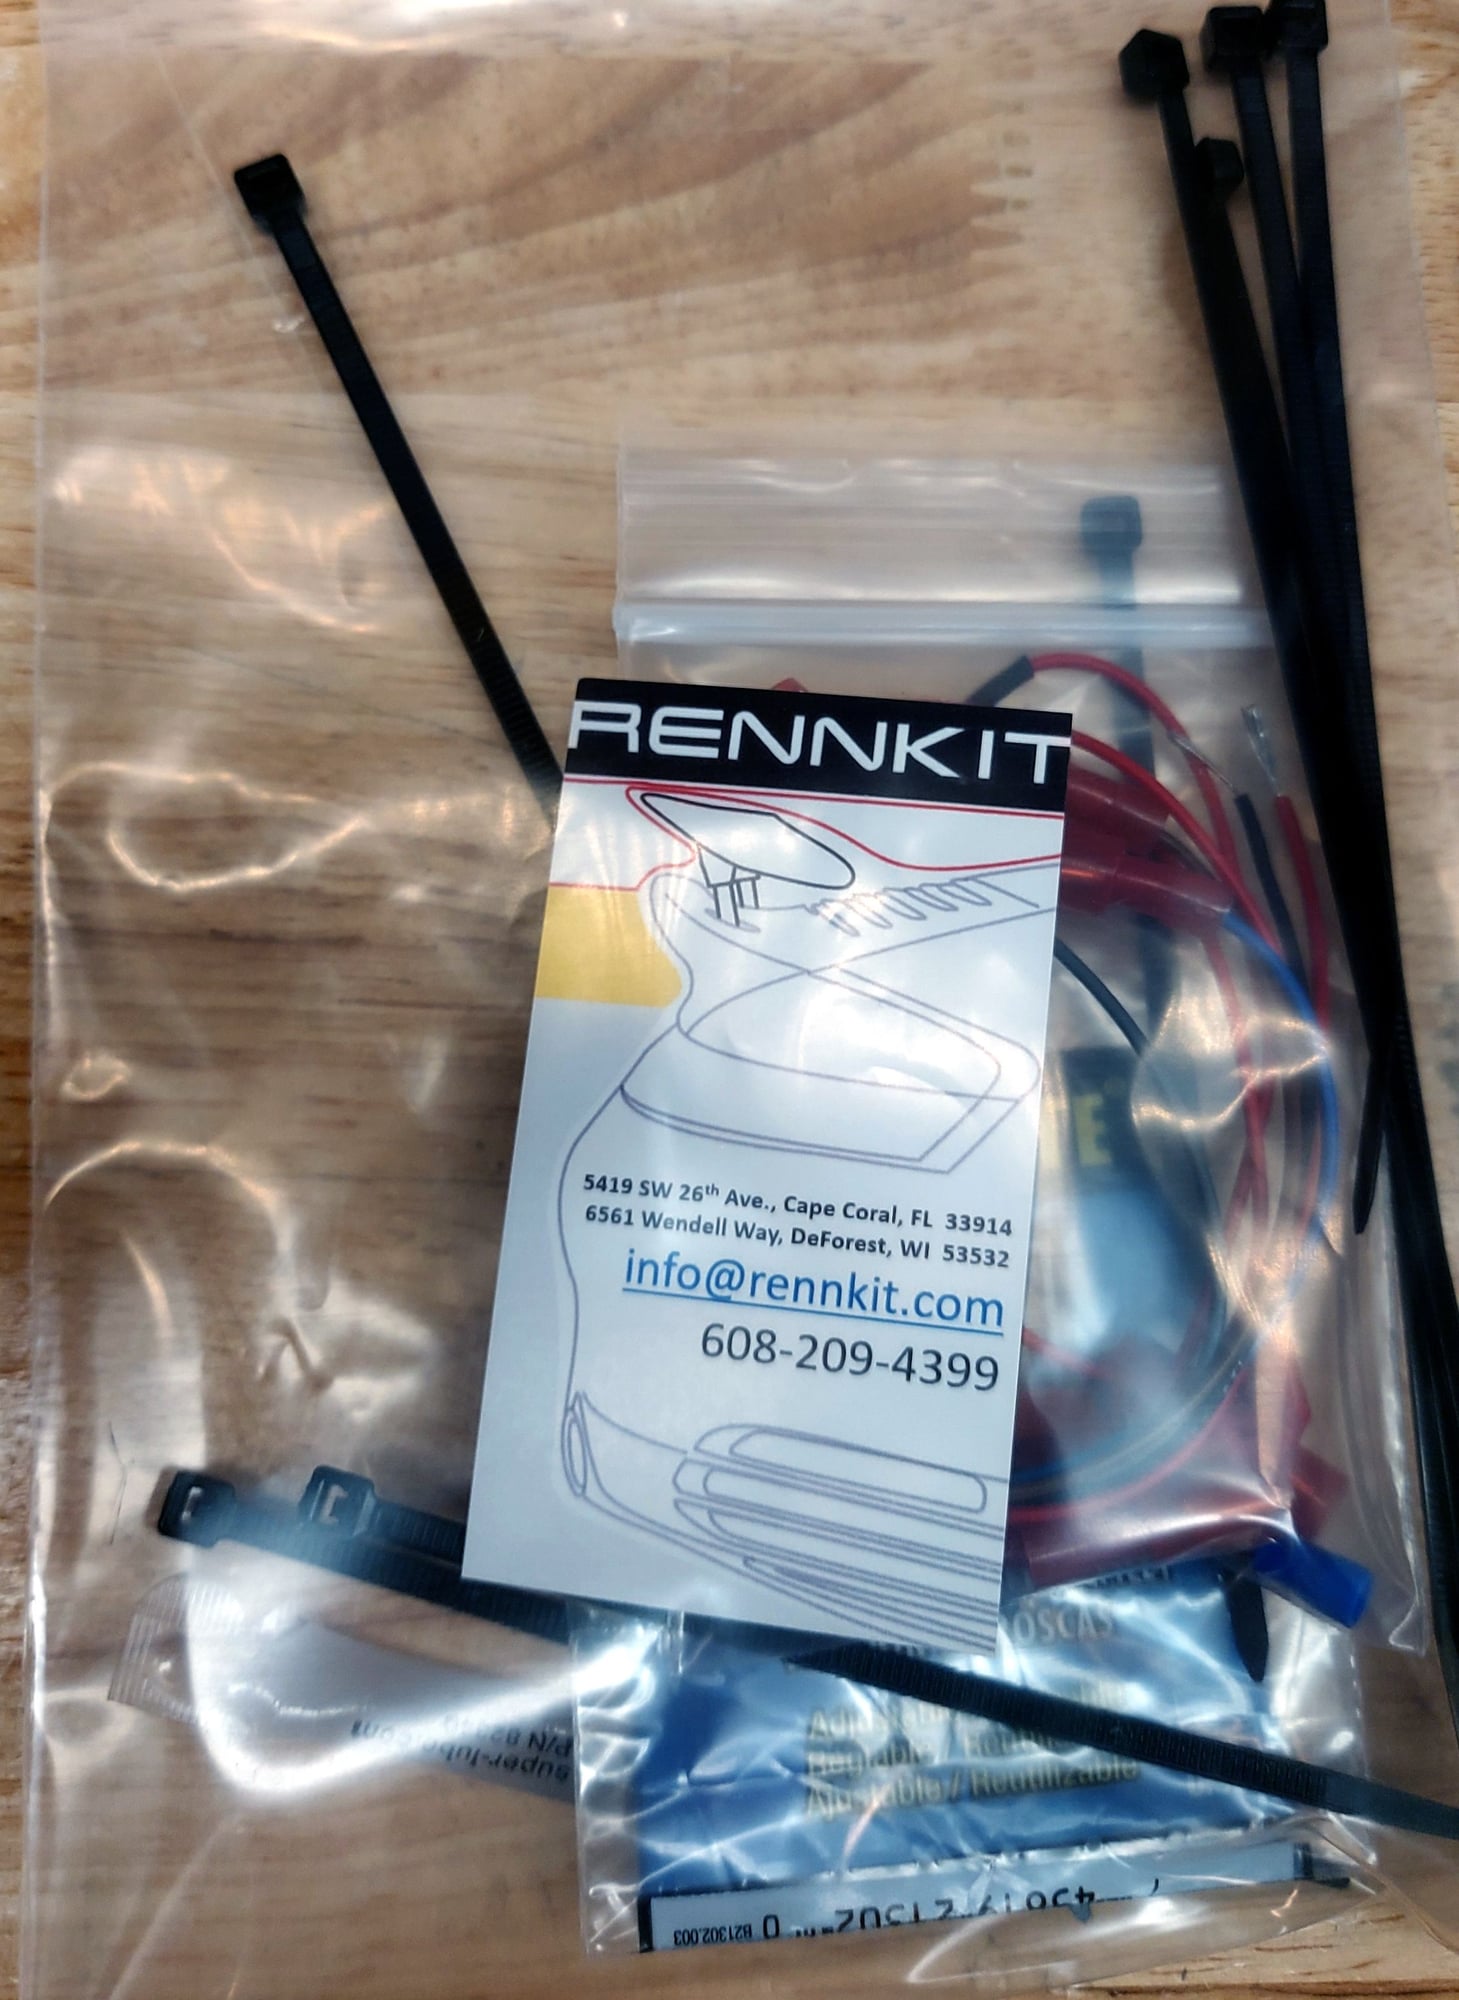 Exterior Body Parts - Rennkit 4" eRam Kit for 996 or 997 Turbo wing - Used - 2001 to 2013 Porsche 911 - Cape Coral, FL 33914, United States